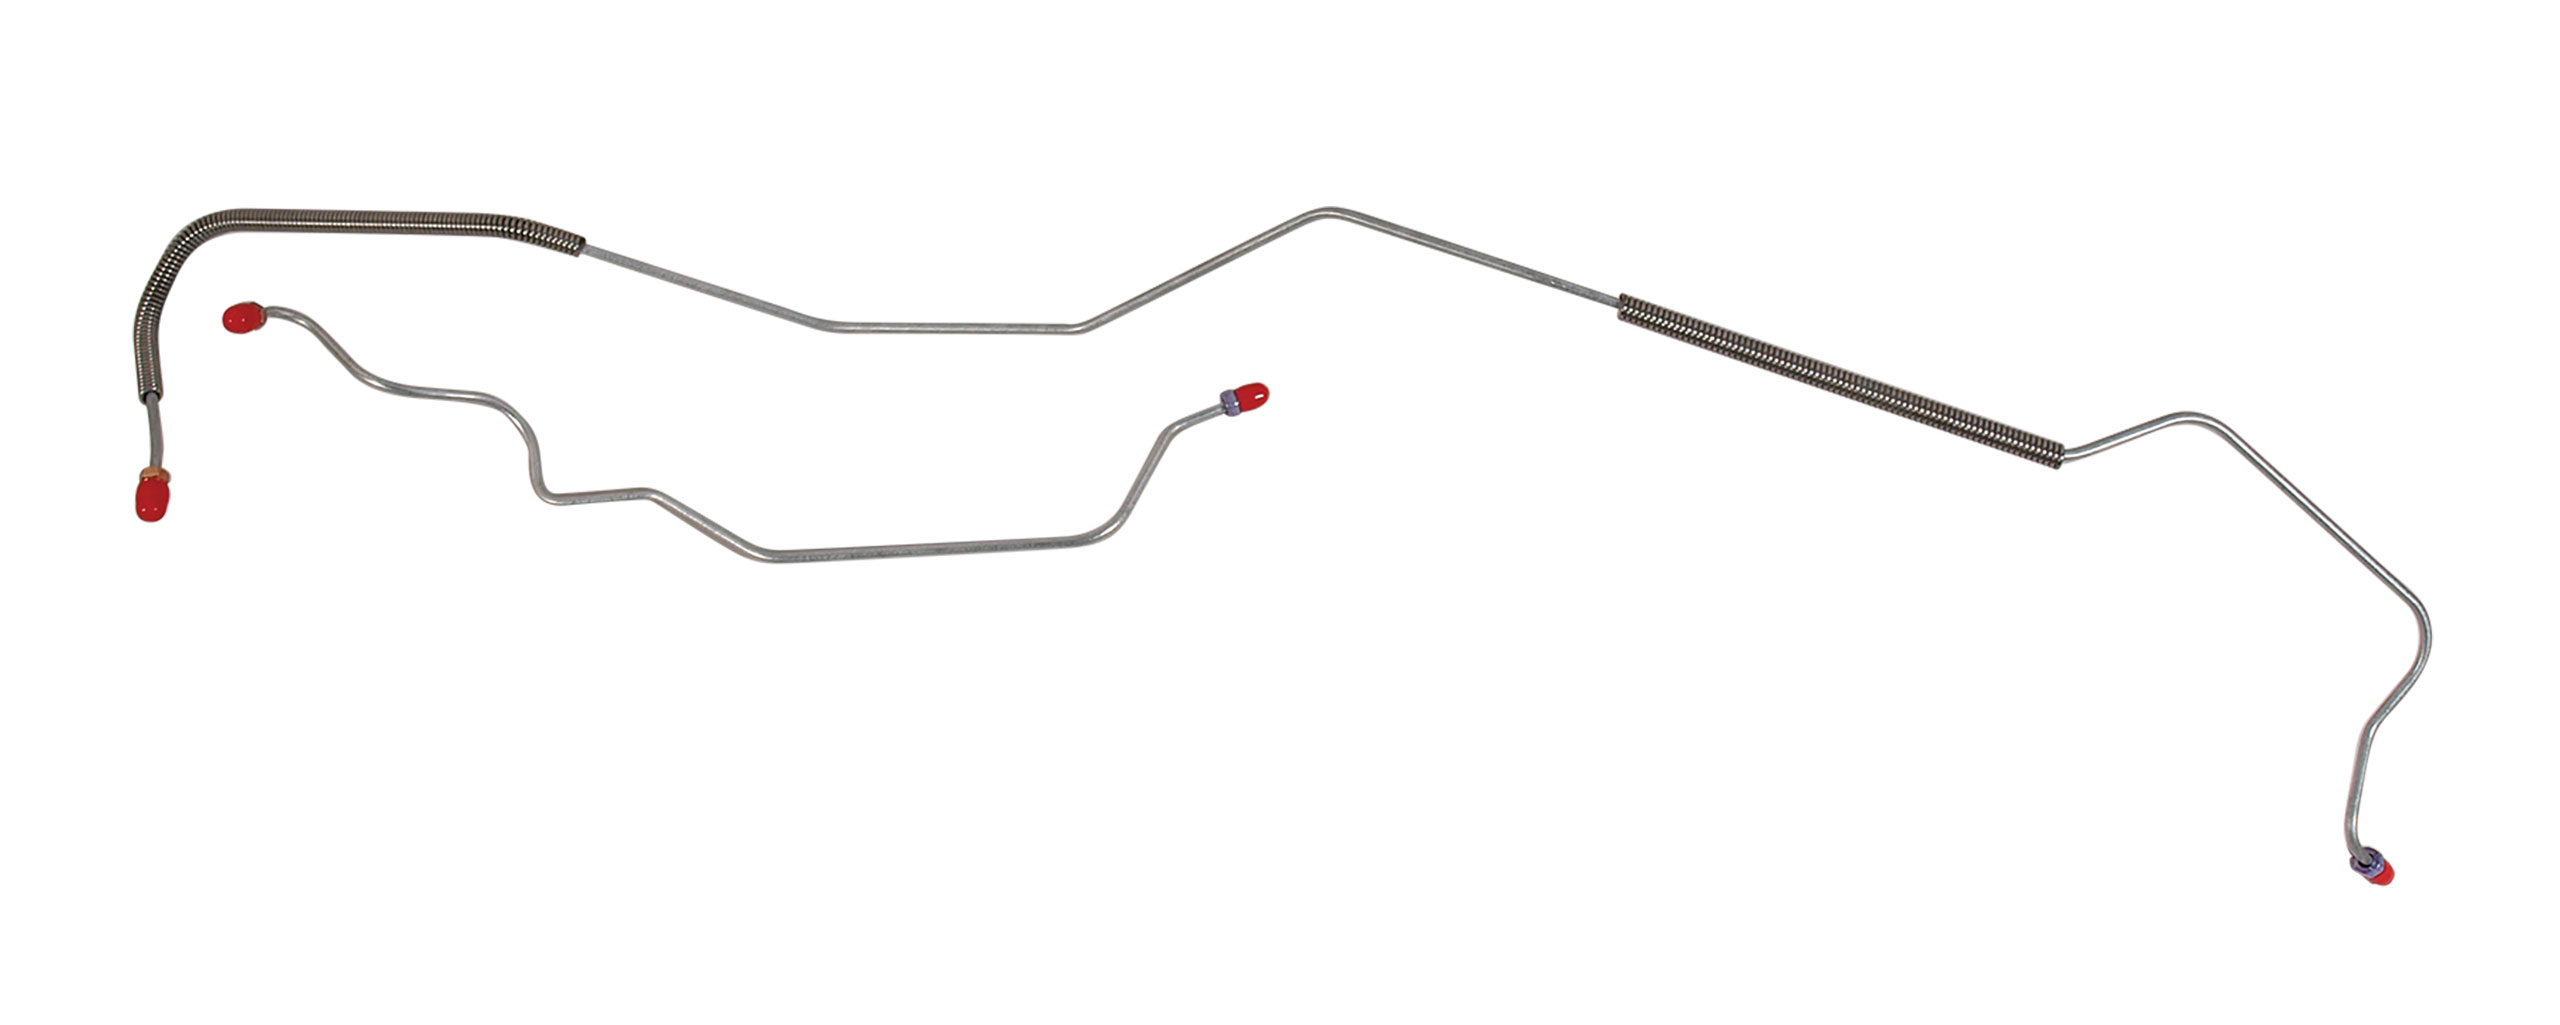 First Generation 1970 Ford Mustang Rear Axle Brake Lines - 2PC - 9